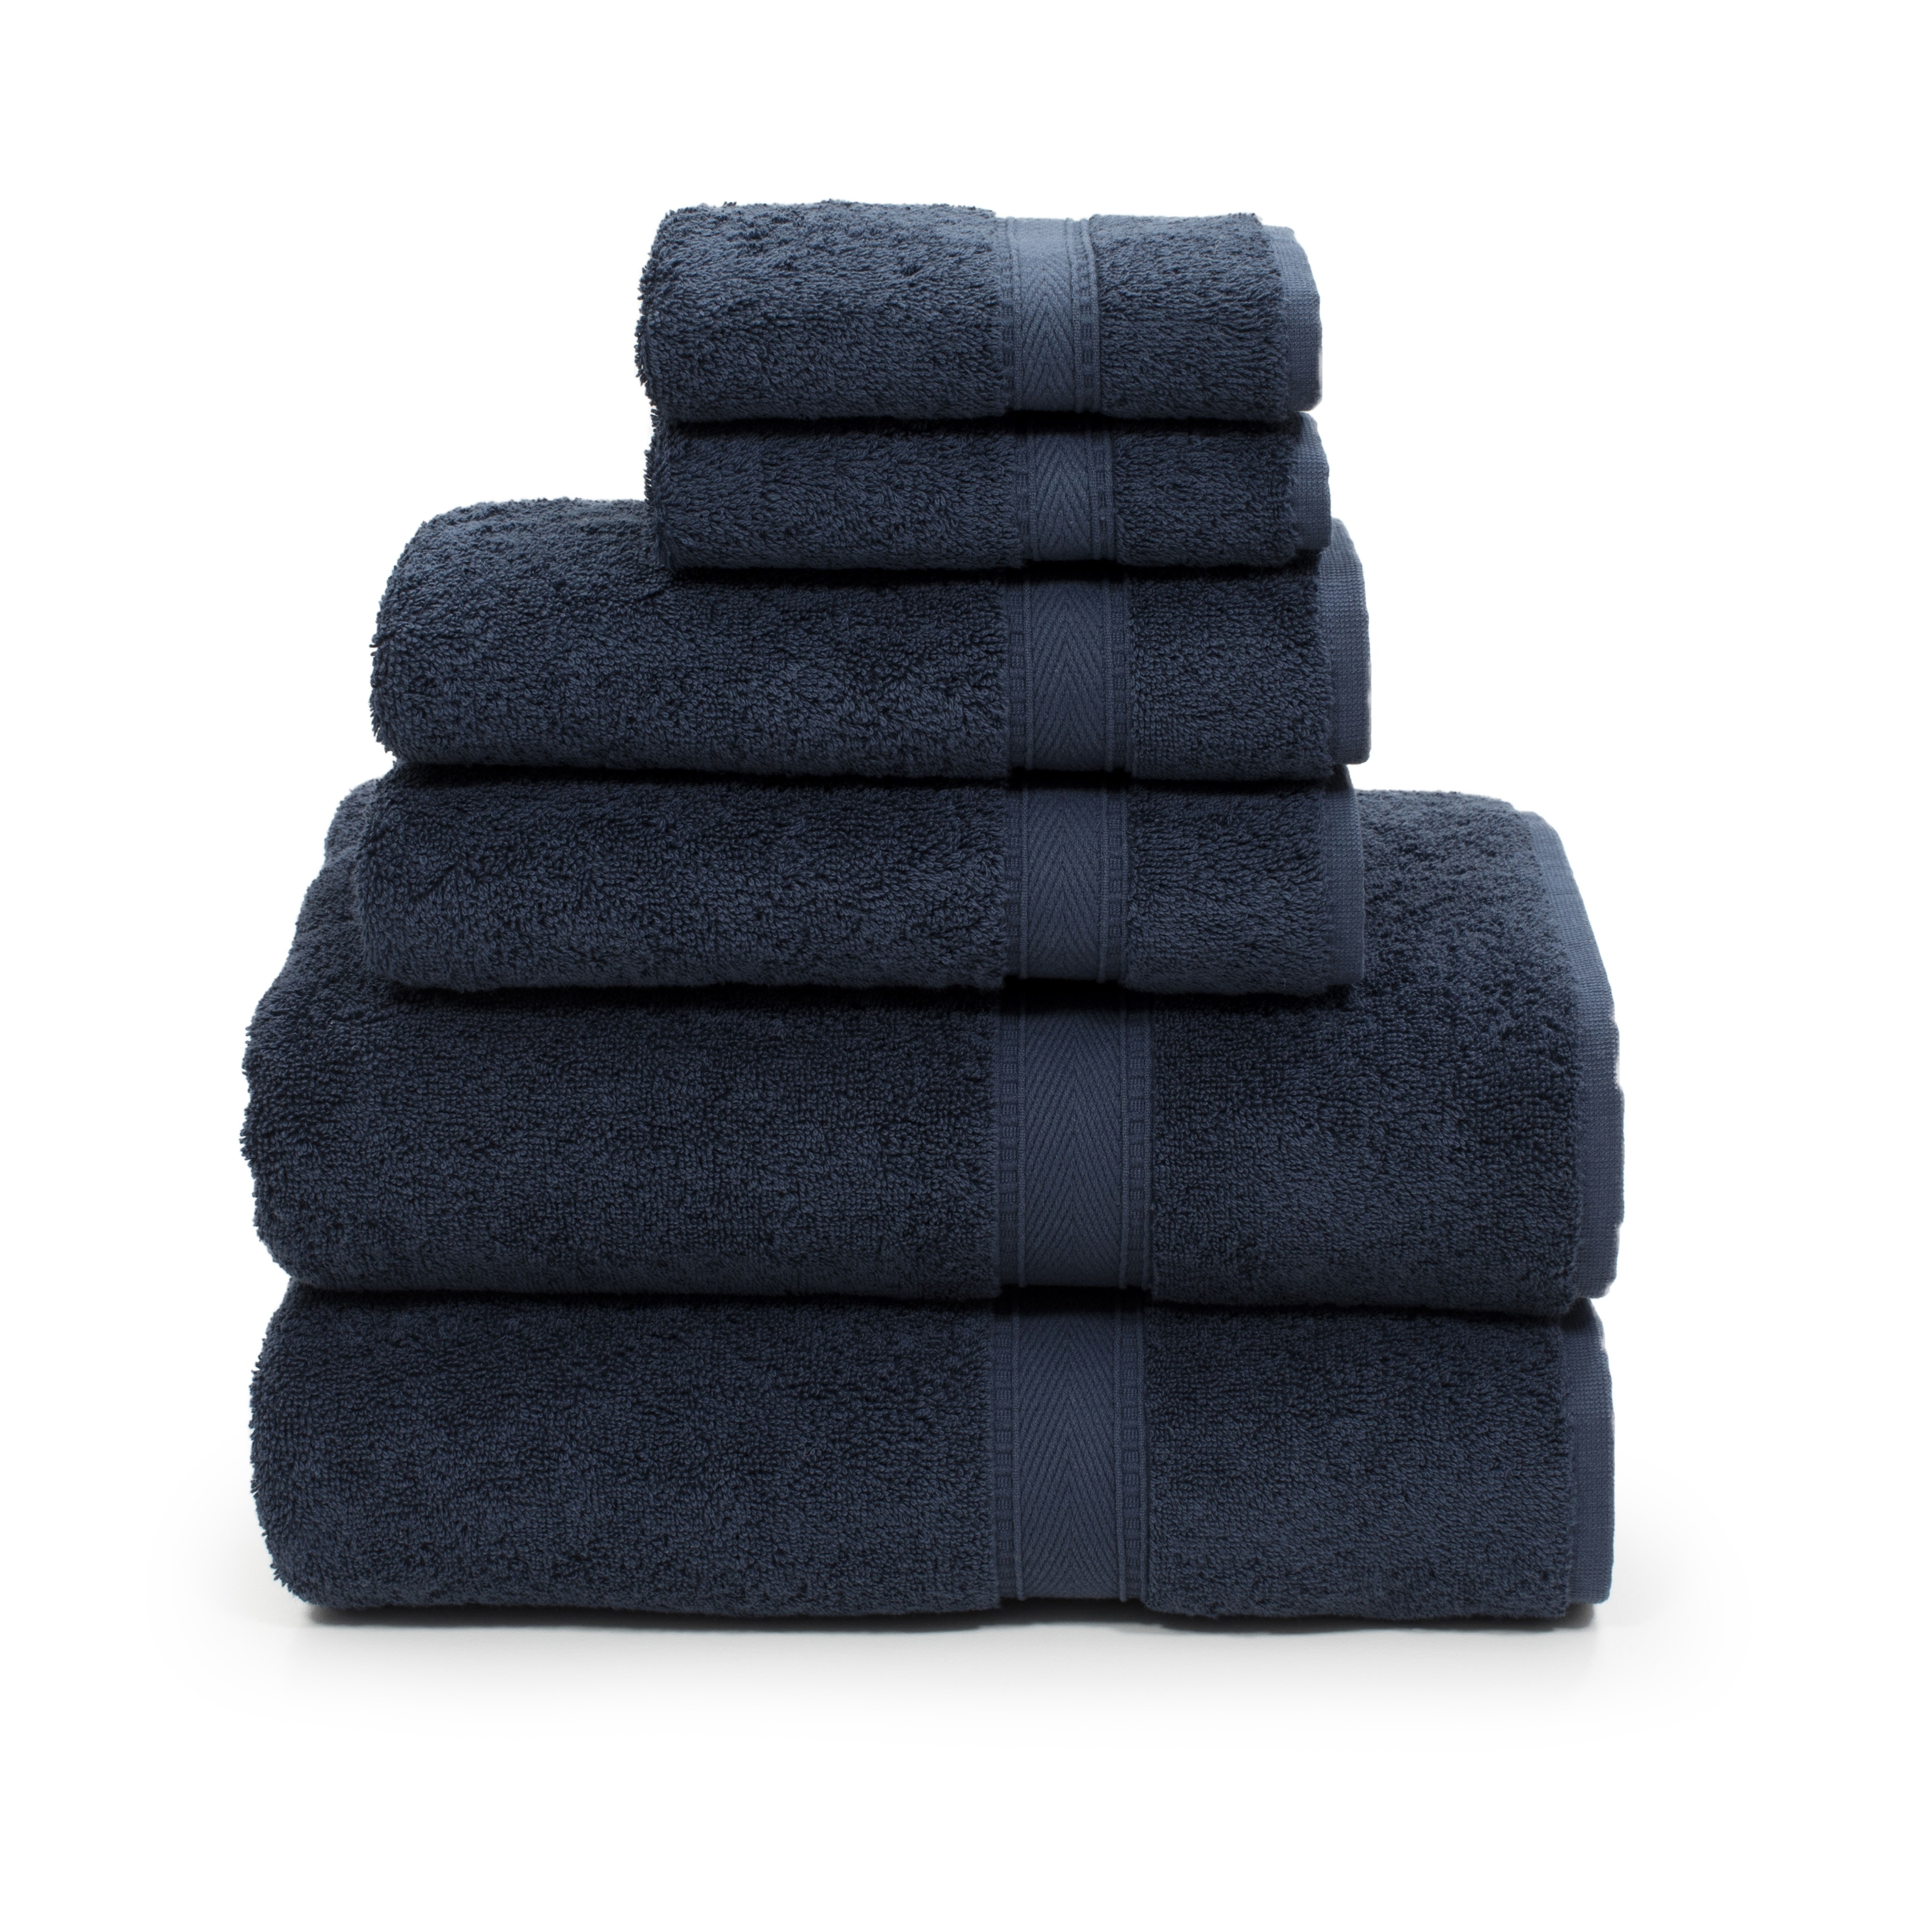 https://ak1.ostkcdn.com/images/products/is/images/direct/b1b96c99efda0abdd2a3b9fcf854cc52ba77122a/Authentic-Hotel-and-Spa-Turkish-Cotton-6-piece-Towel-Set.jpg